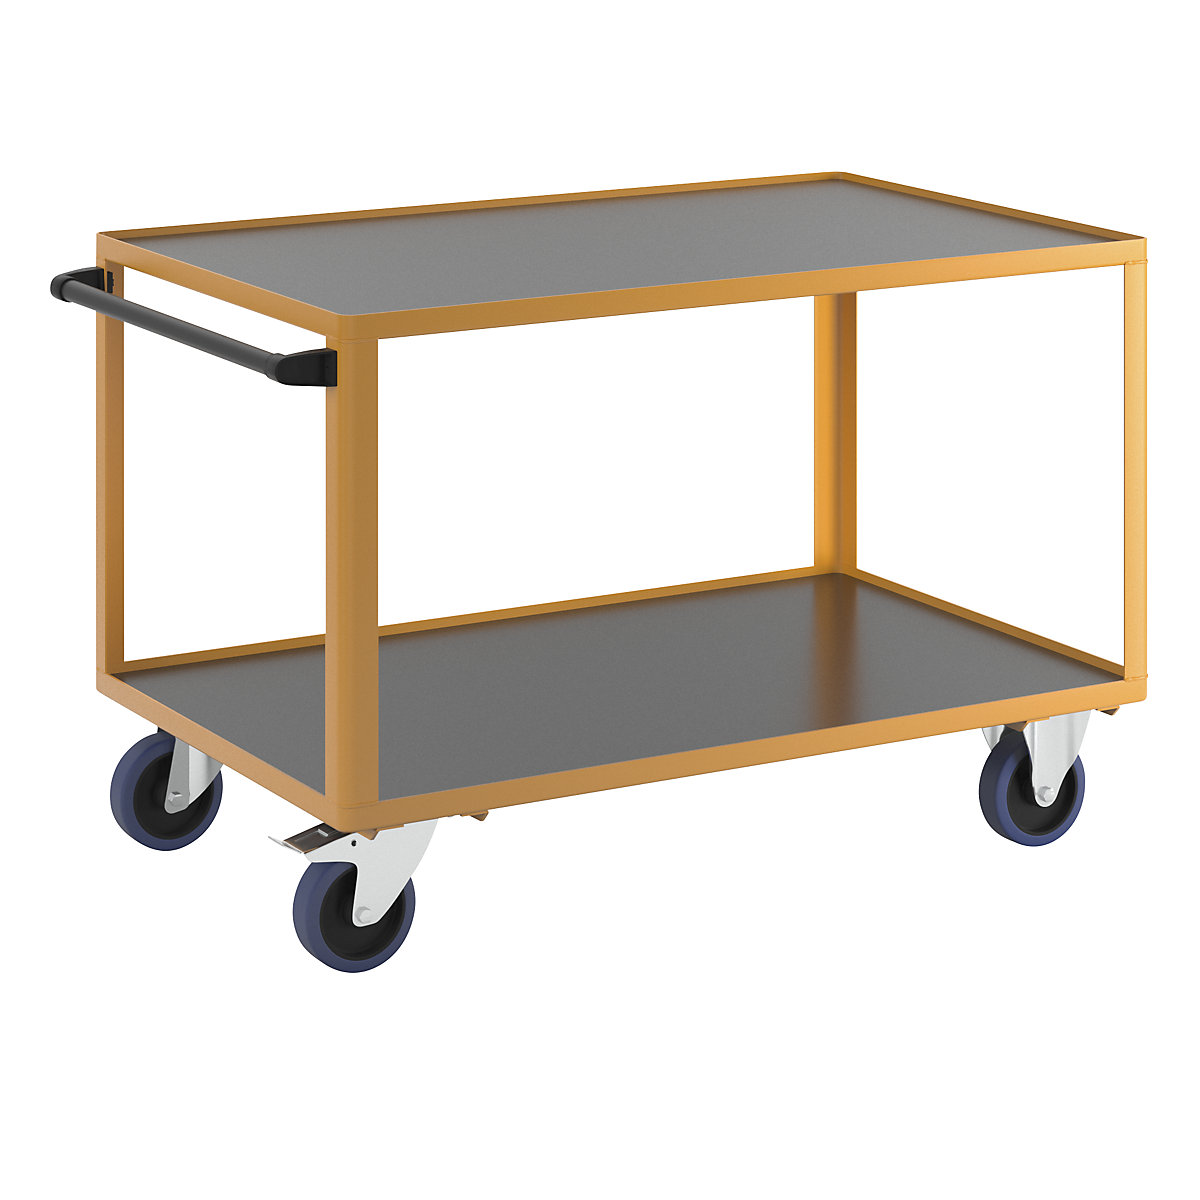 Professional workshop trolley, with snap-on push handle, LxW 1350 x 800 mm, max. load 350 kg-10